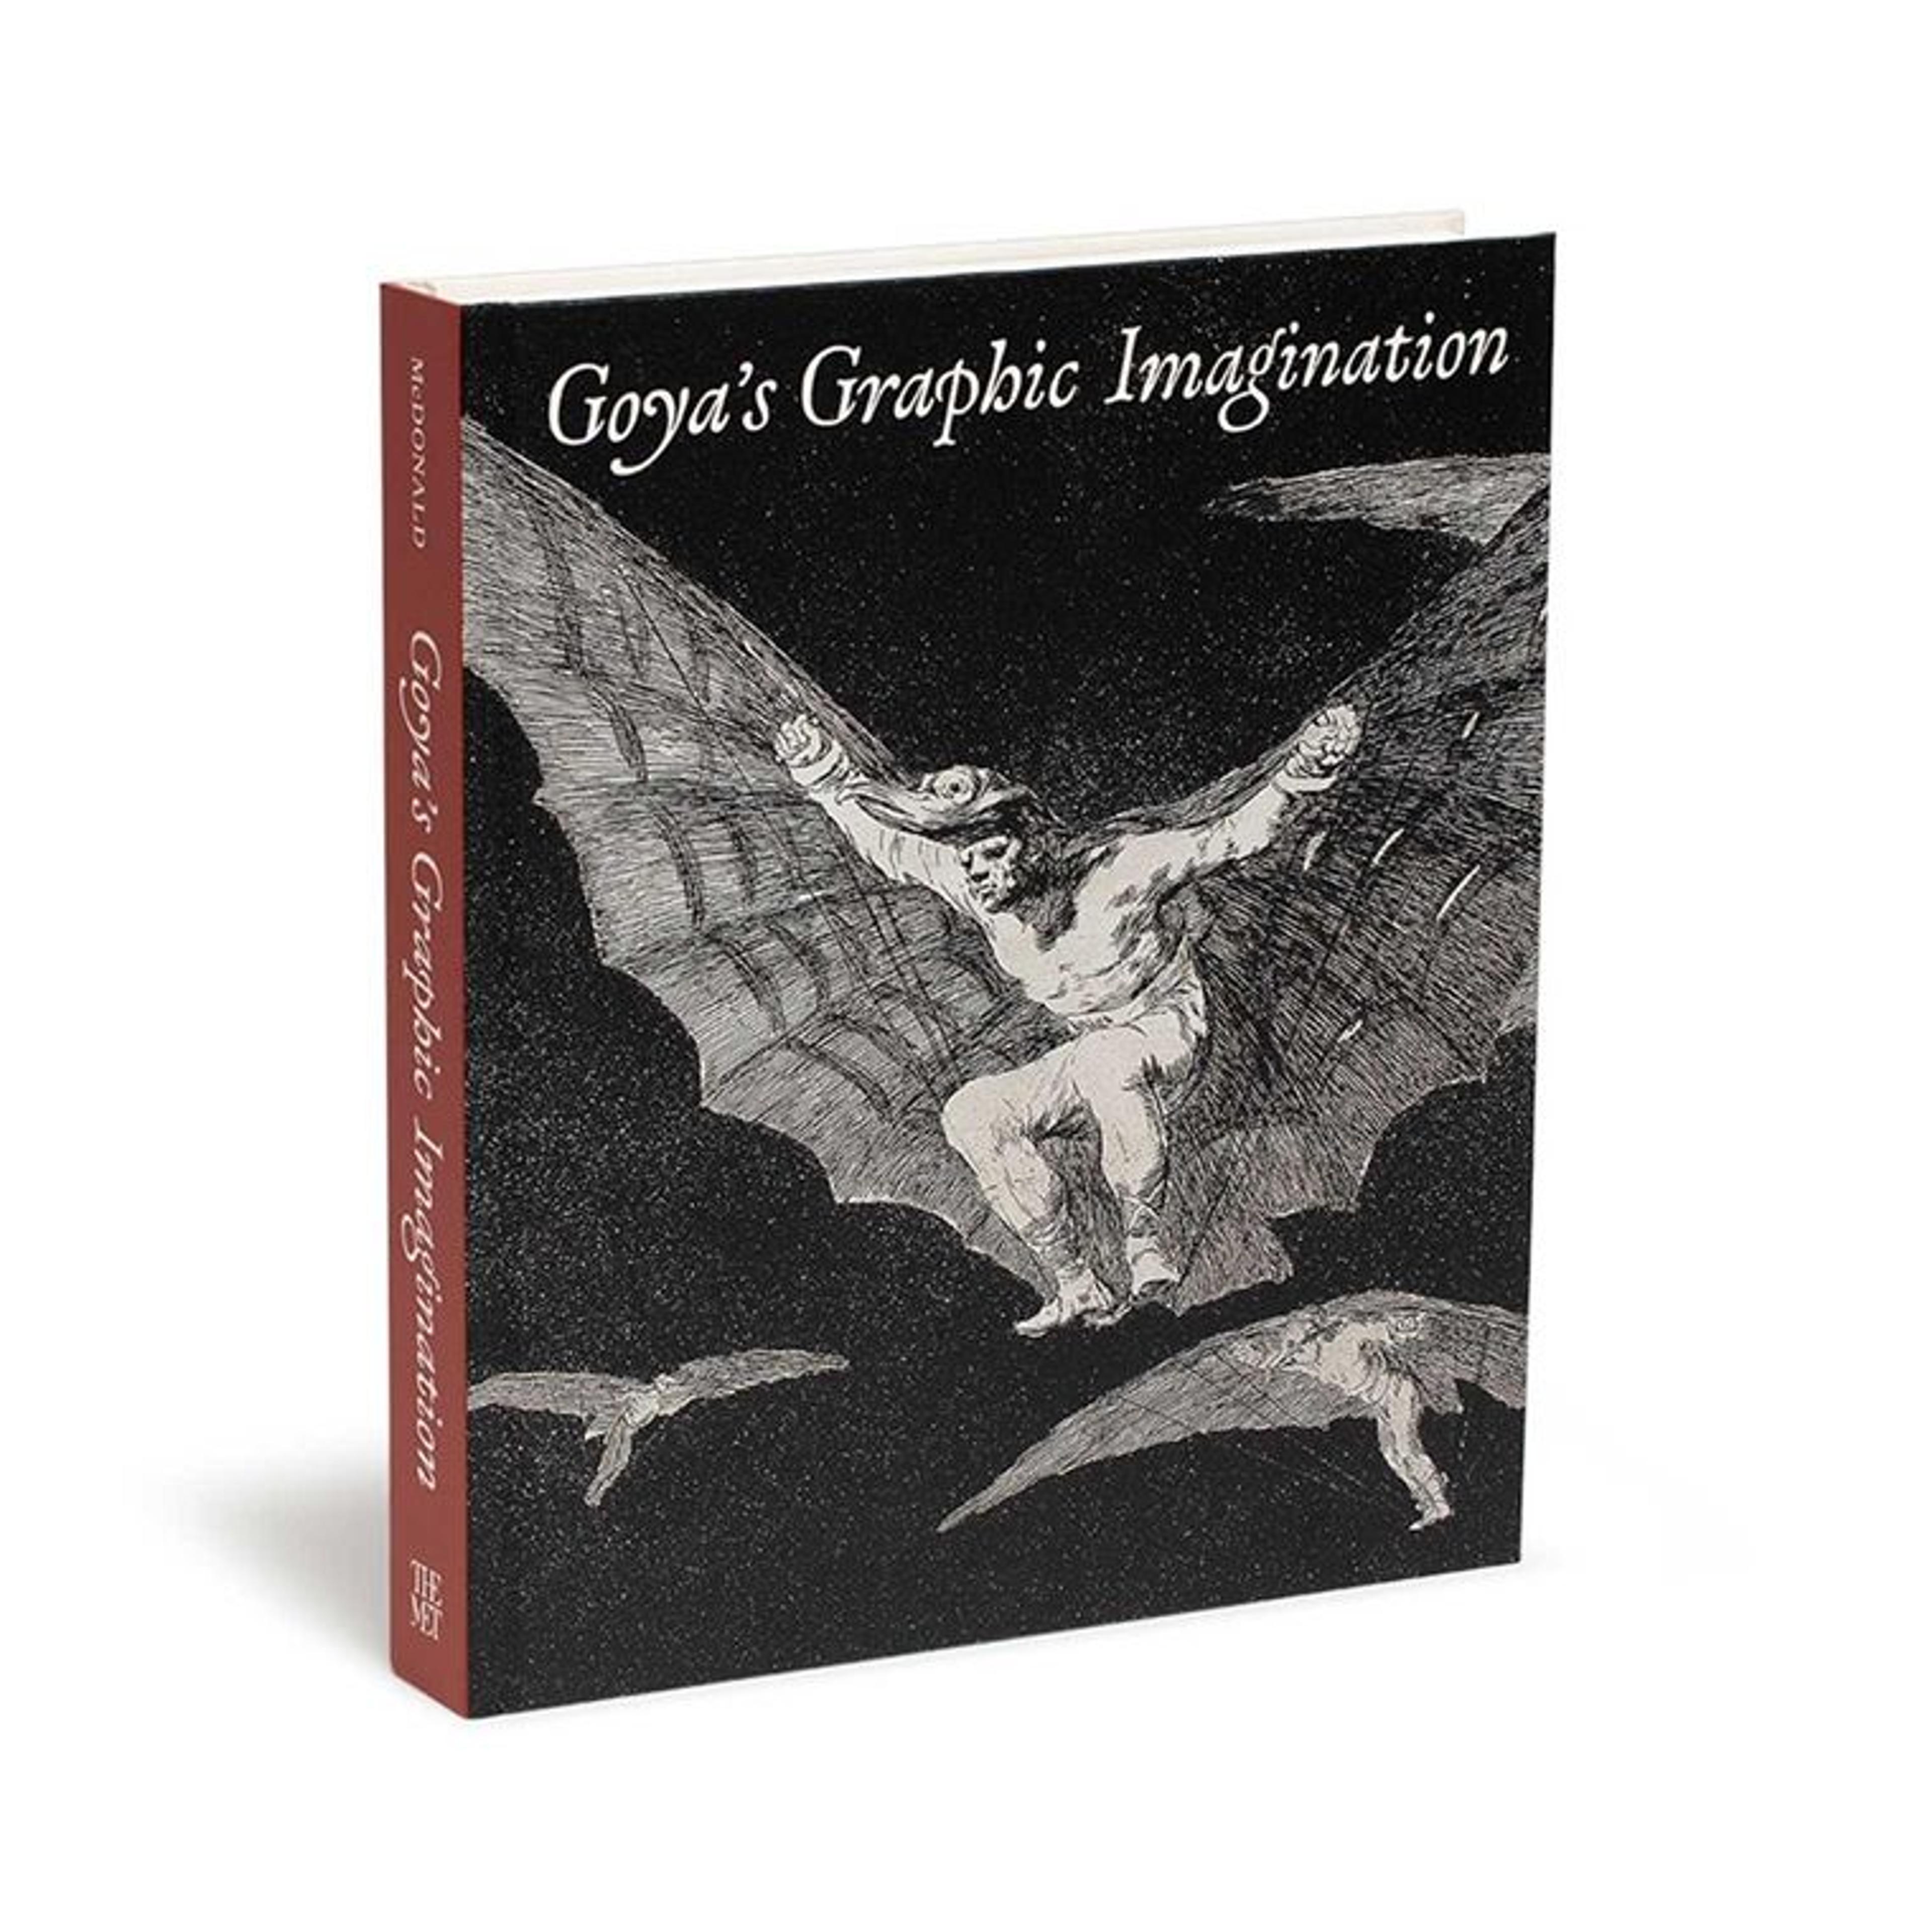 Photograph of a book with a cover drawing of stron naked man jumping with wings titled "Goya's Graphic Imagination"